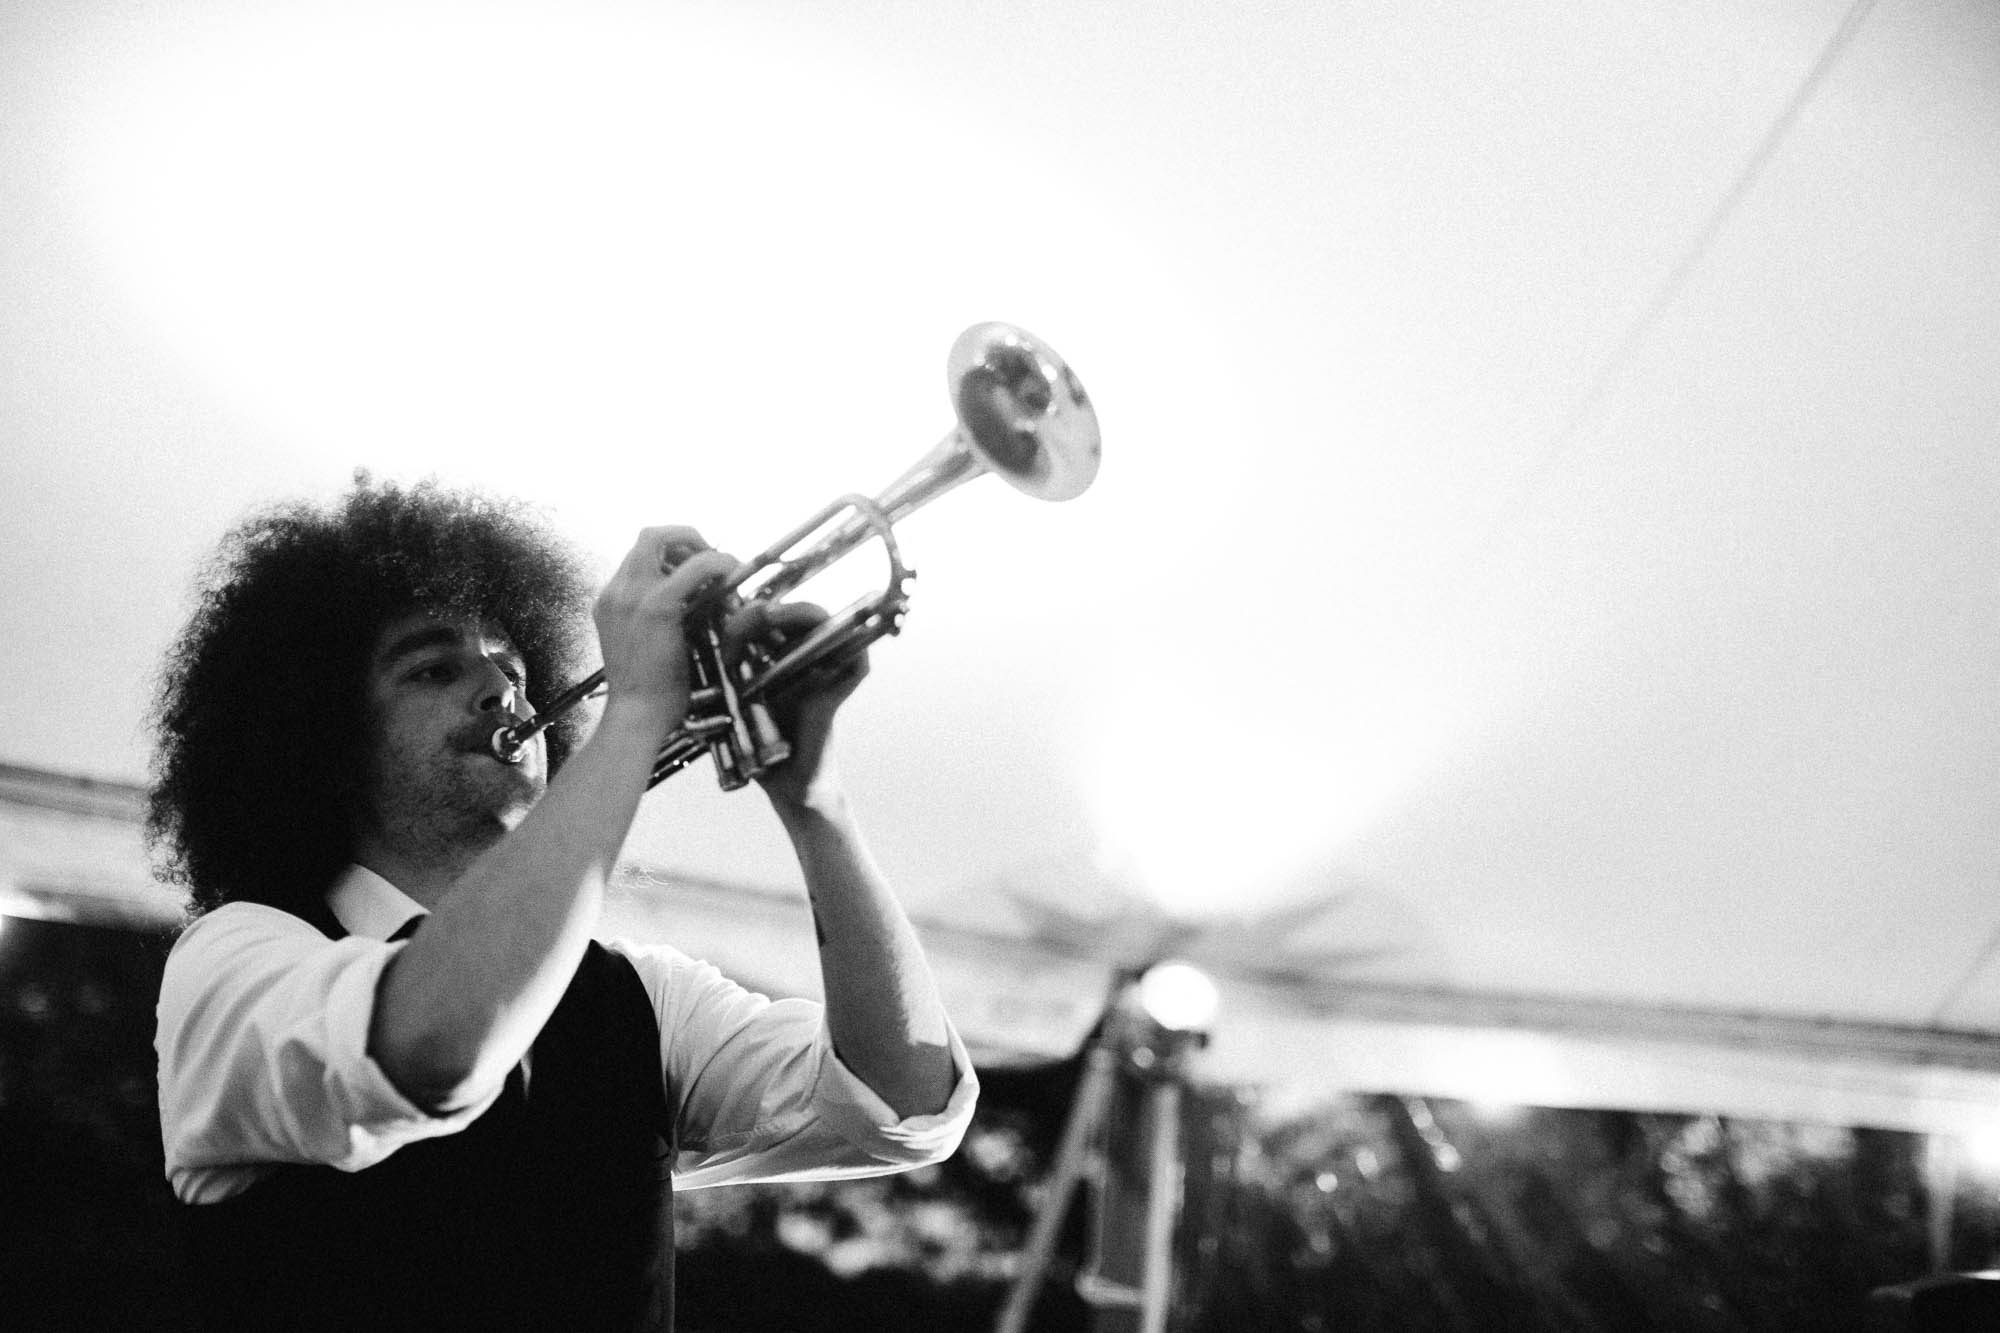 from the edge of the picture the trumpet player is in mid flow and has a very funky afro hair cut